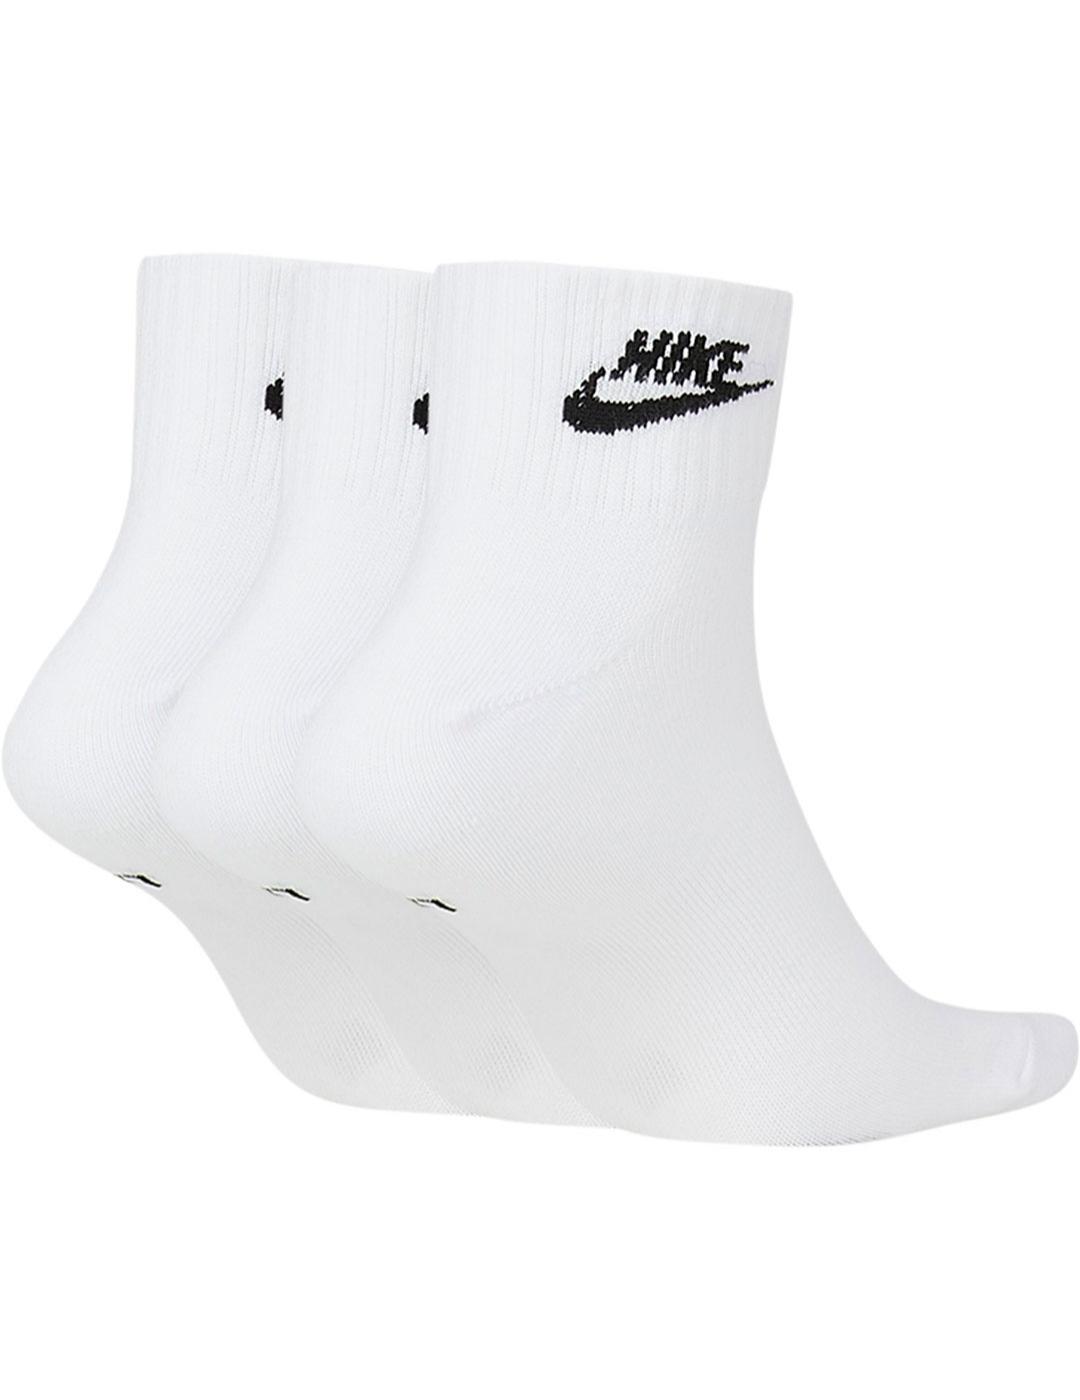 Calcetines Unisex Nike Every Essential Blancos